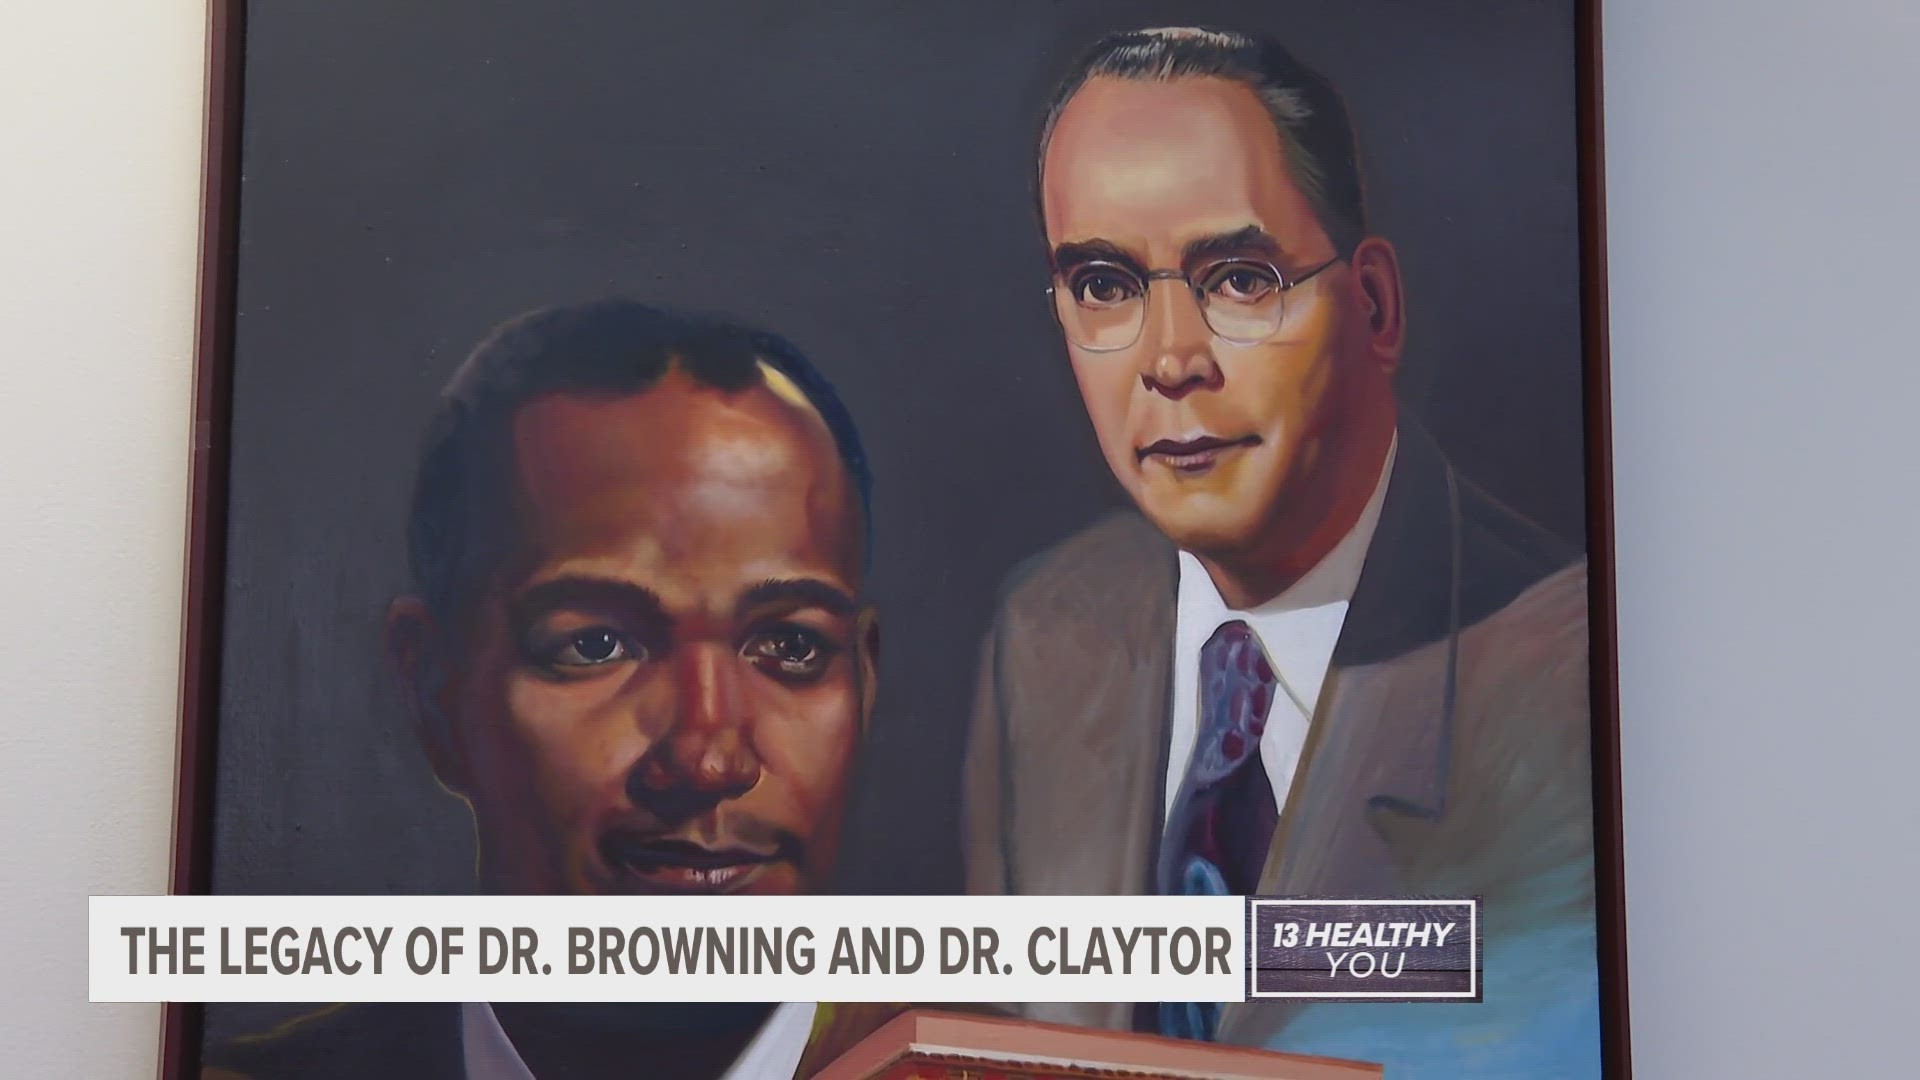 Named for two iconic Black doctors in Grand Rapids, Dr. Eugene Browning and Dr. Robert Claytor, the clinic is increasing access to healthcare in a vital community.